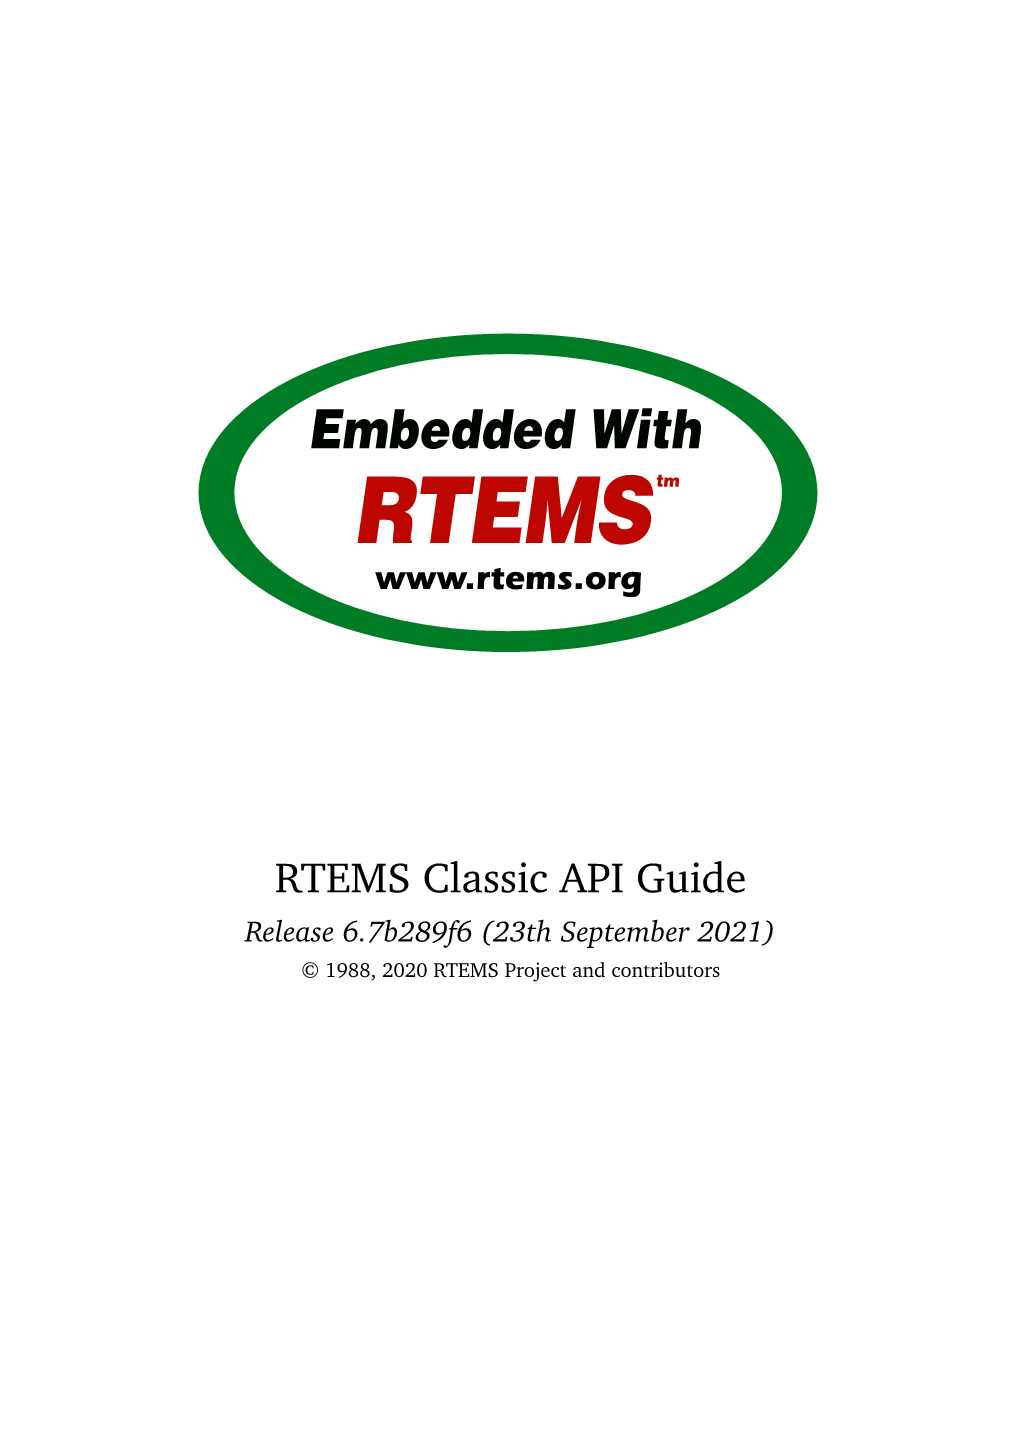 RTEMS Classic API Guide Release 6.7B289f6 (23Th September 2021) © 1988, 2020 RTEMS Project and Contributors